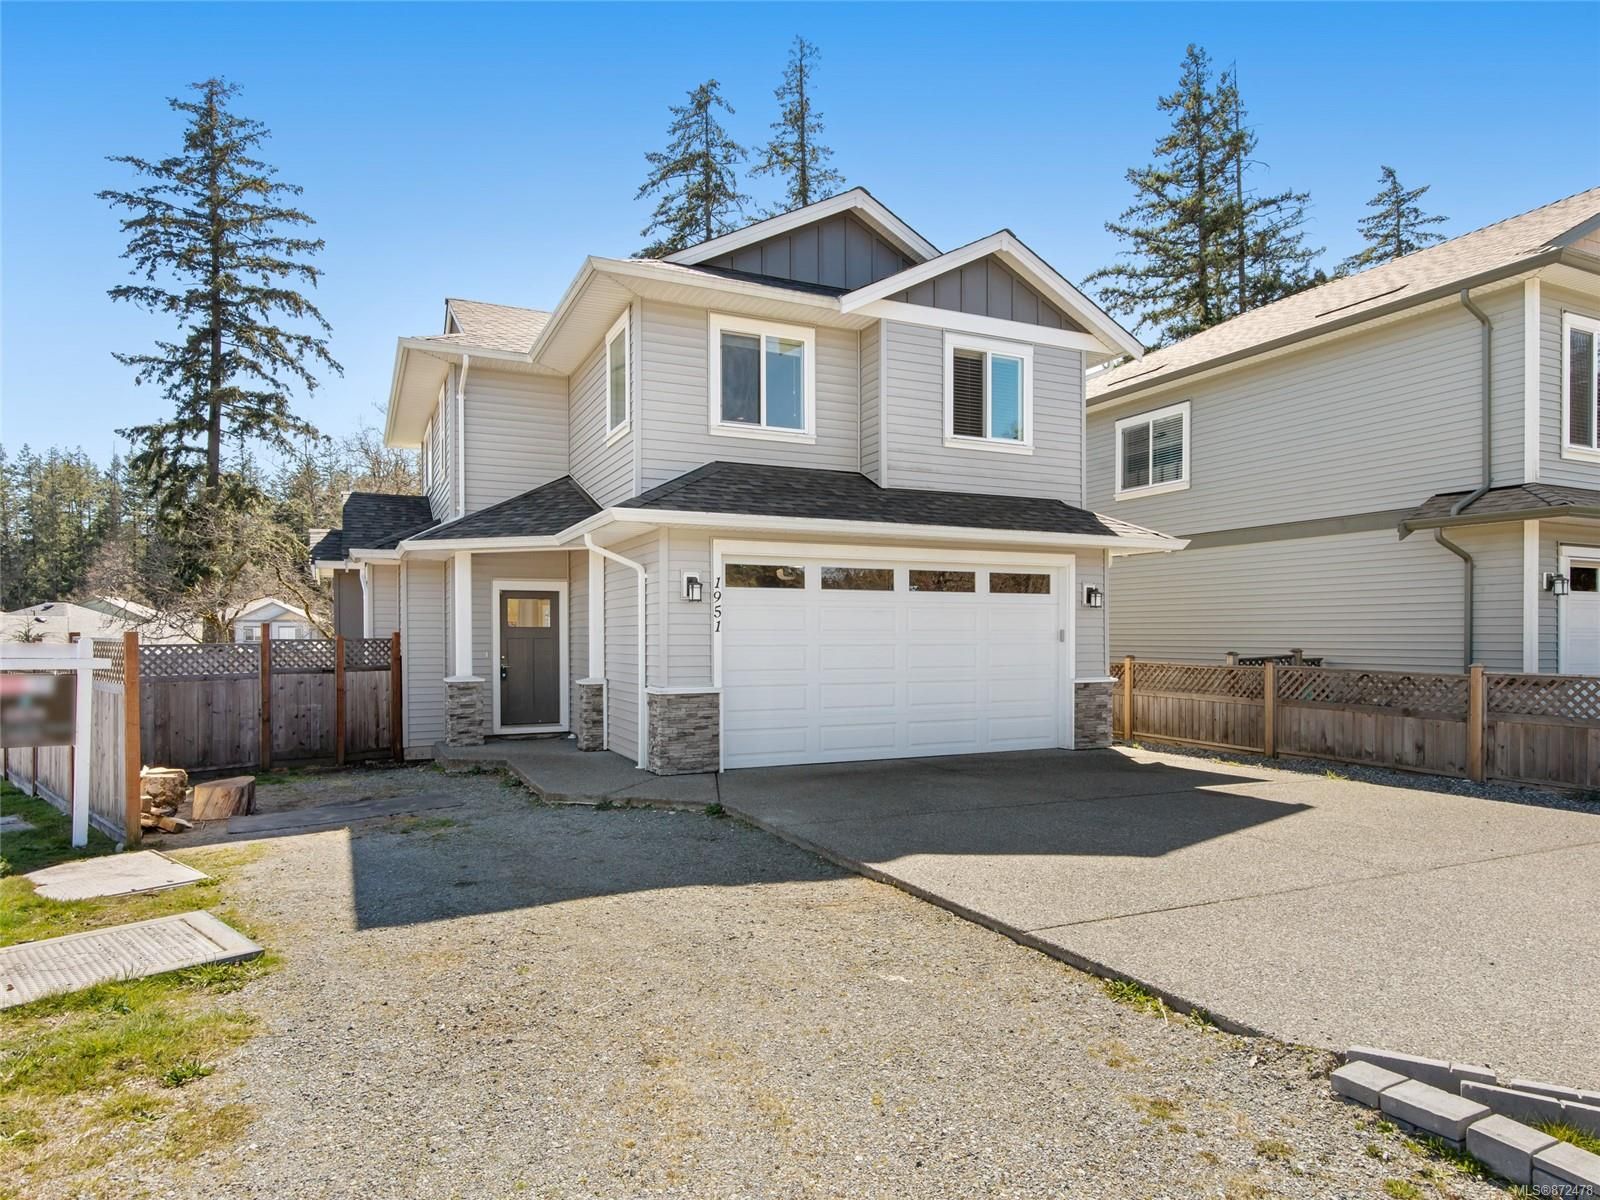 I have sold a property at 1951 Suhanna Rd in Nanaimo
